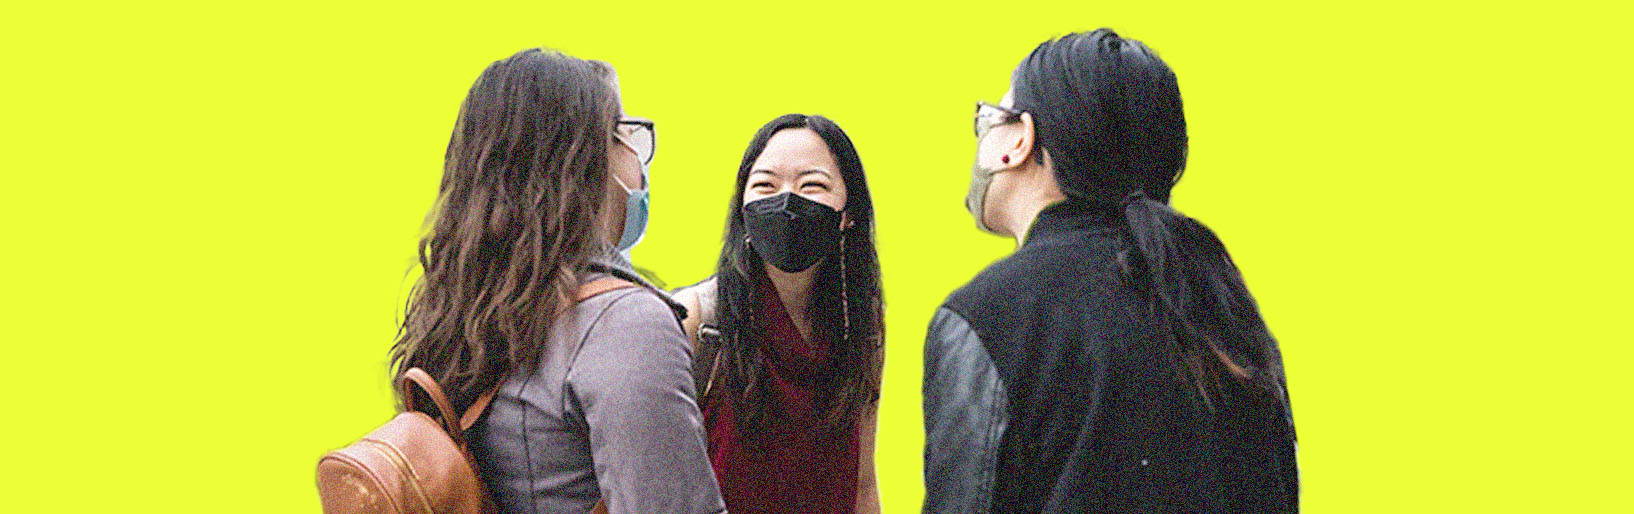 three people smile and talk with each other wearing a mask, in comfortable casual clothing. Bright yellow banner.